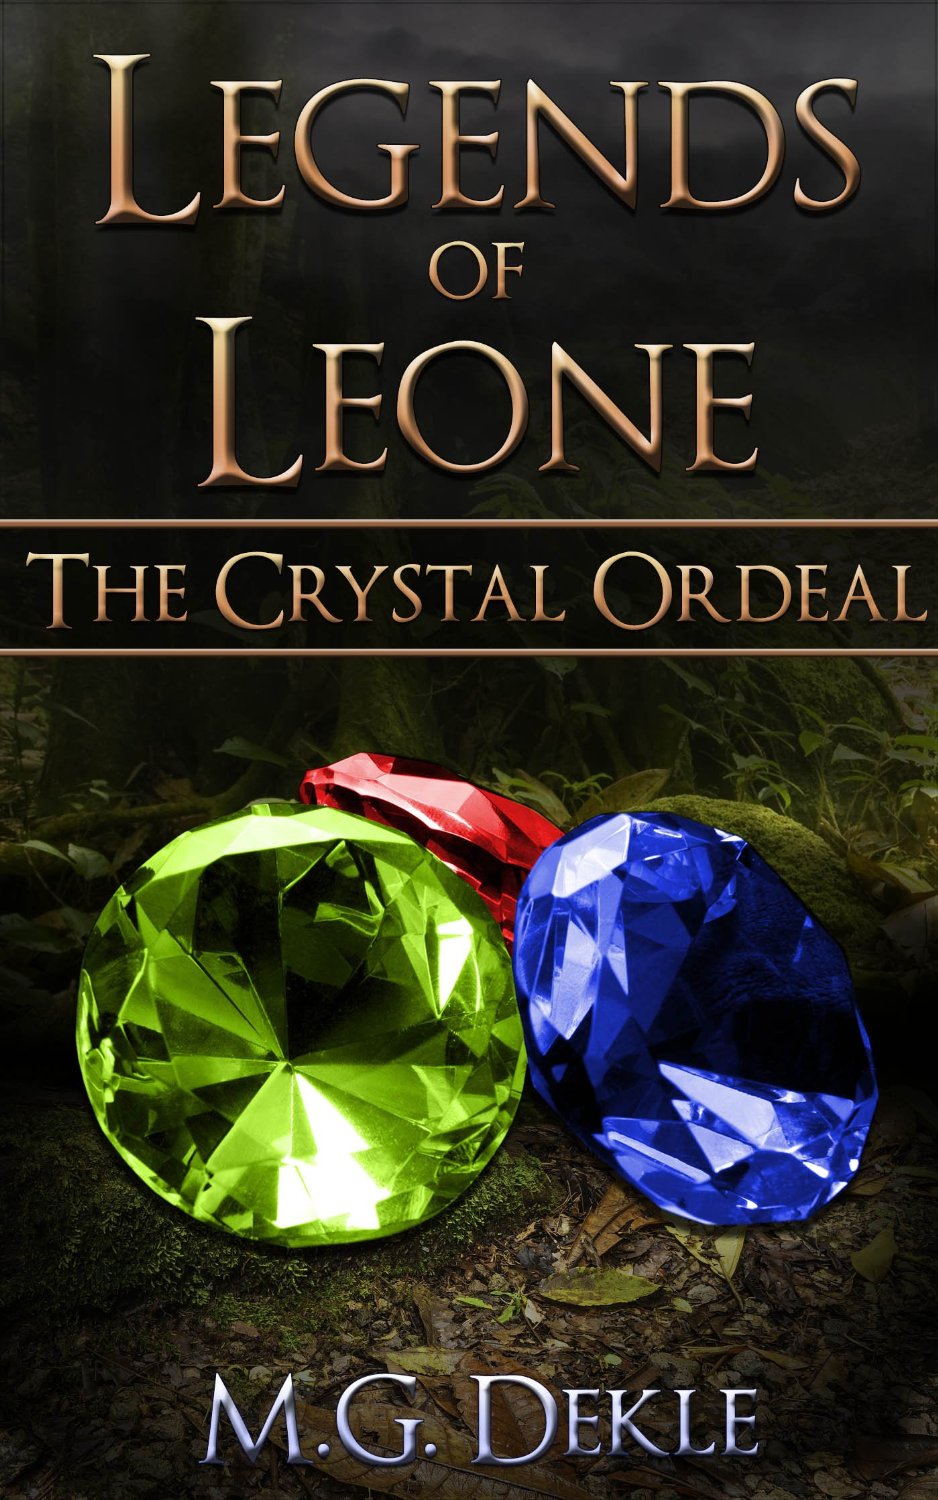 Legends of Leone: The Crystal Ordeal by M.G. Dekle